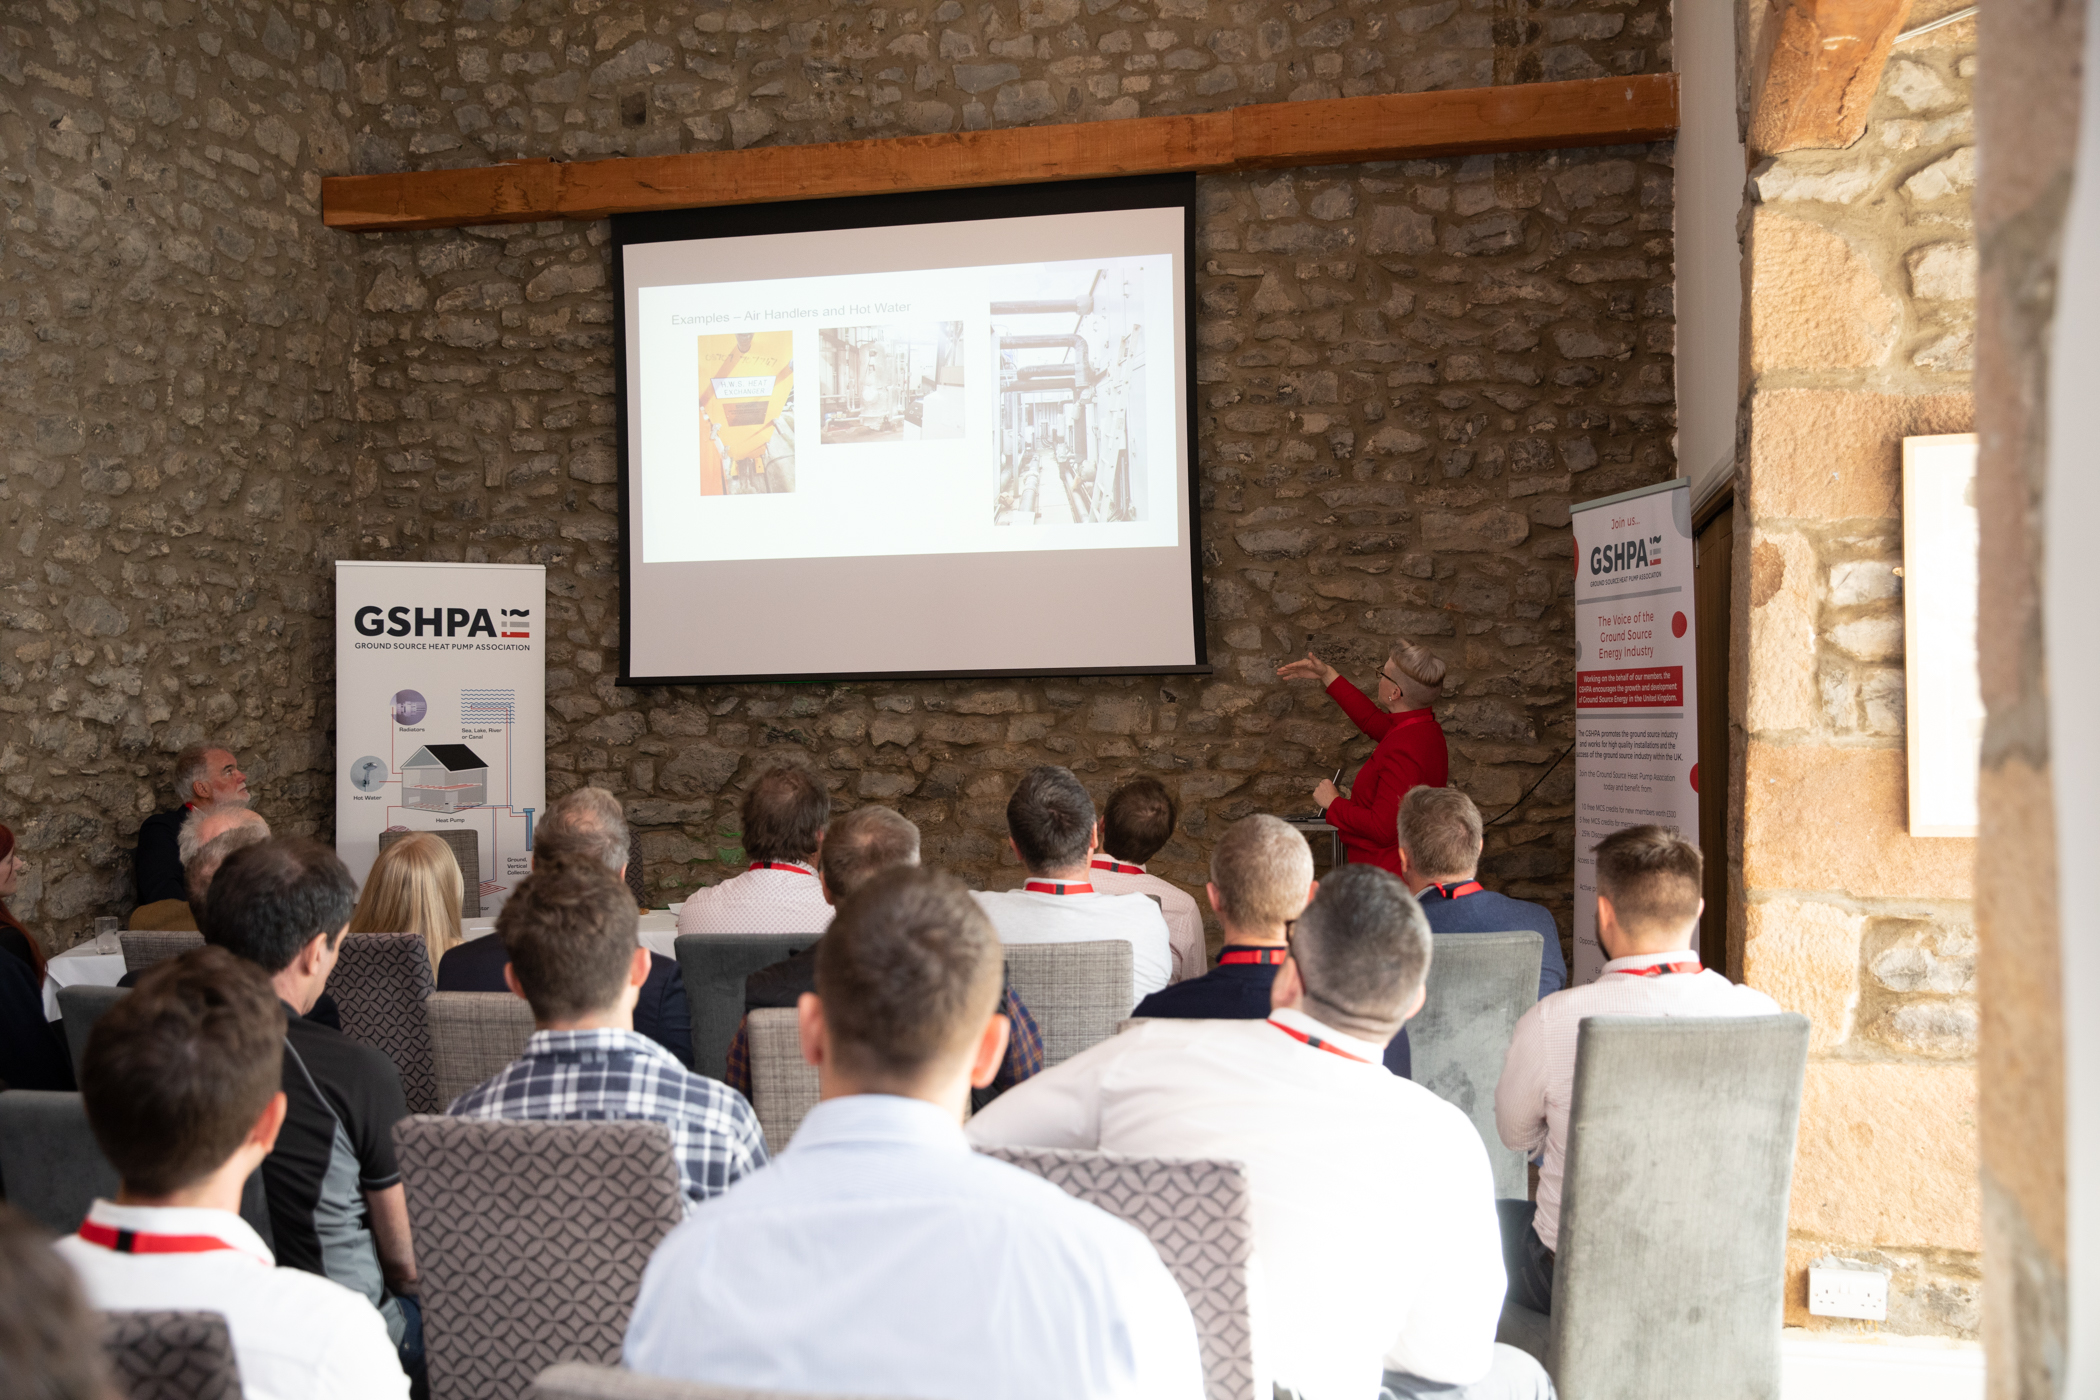 The training scheme will provide practical advice and essential information on every aspect of ground source heat pumps.